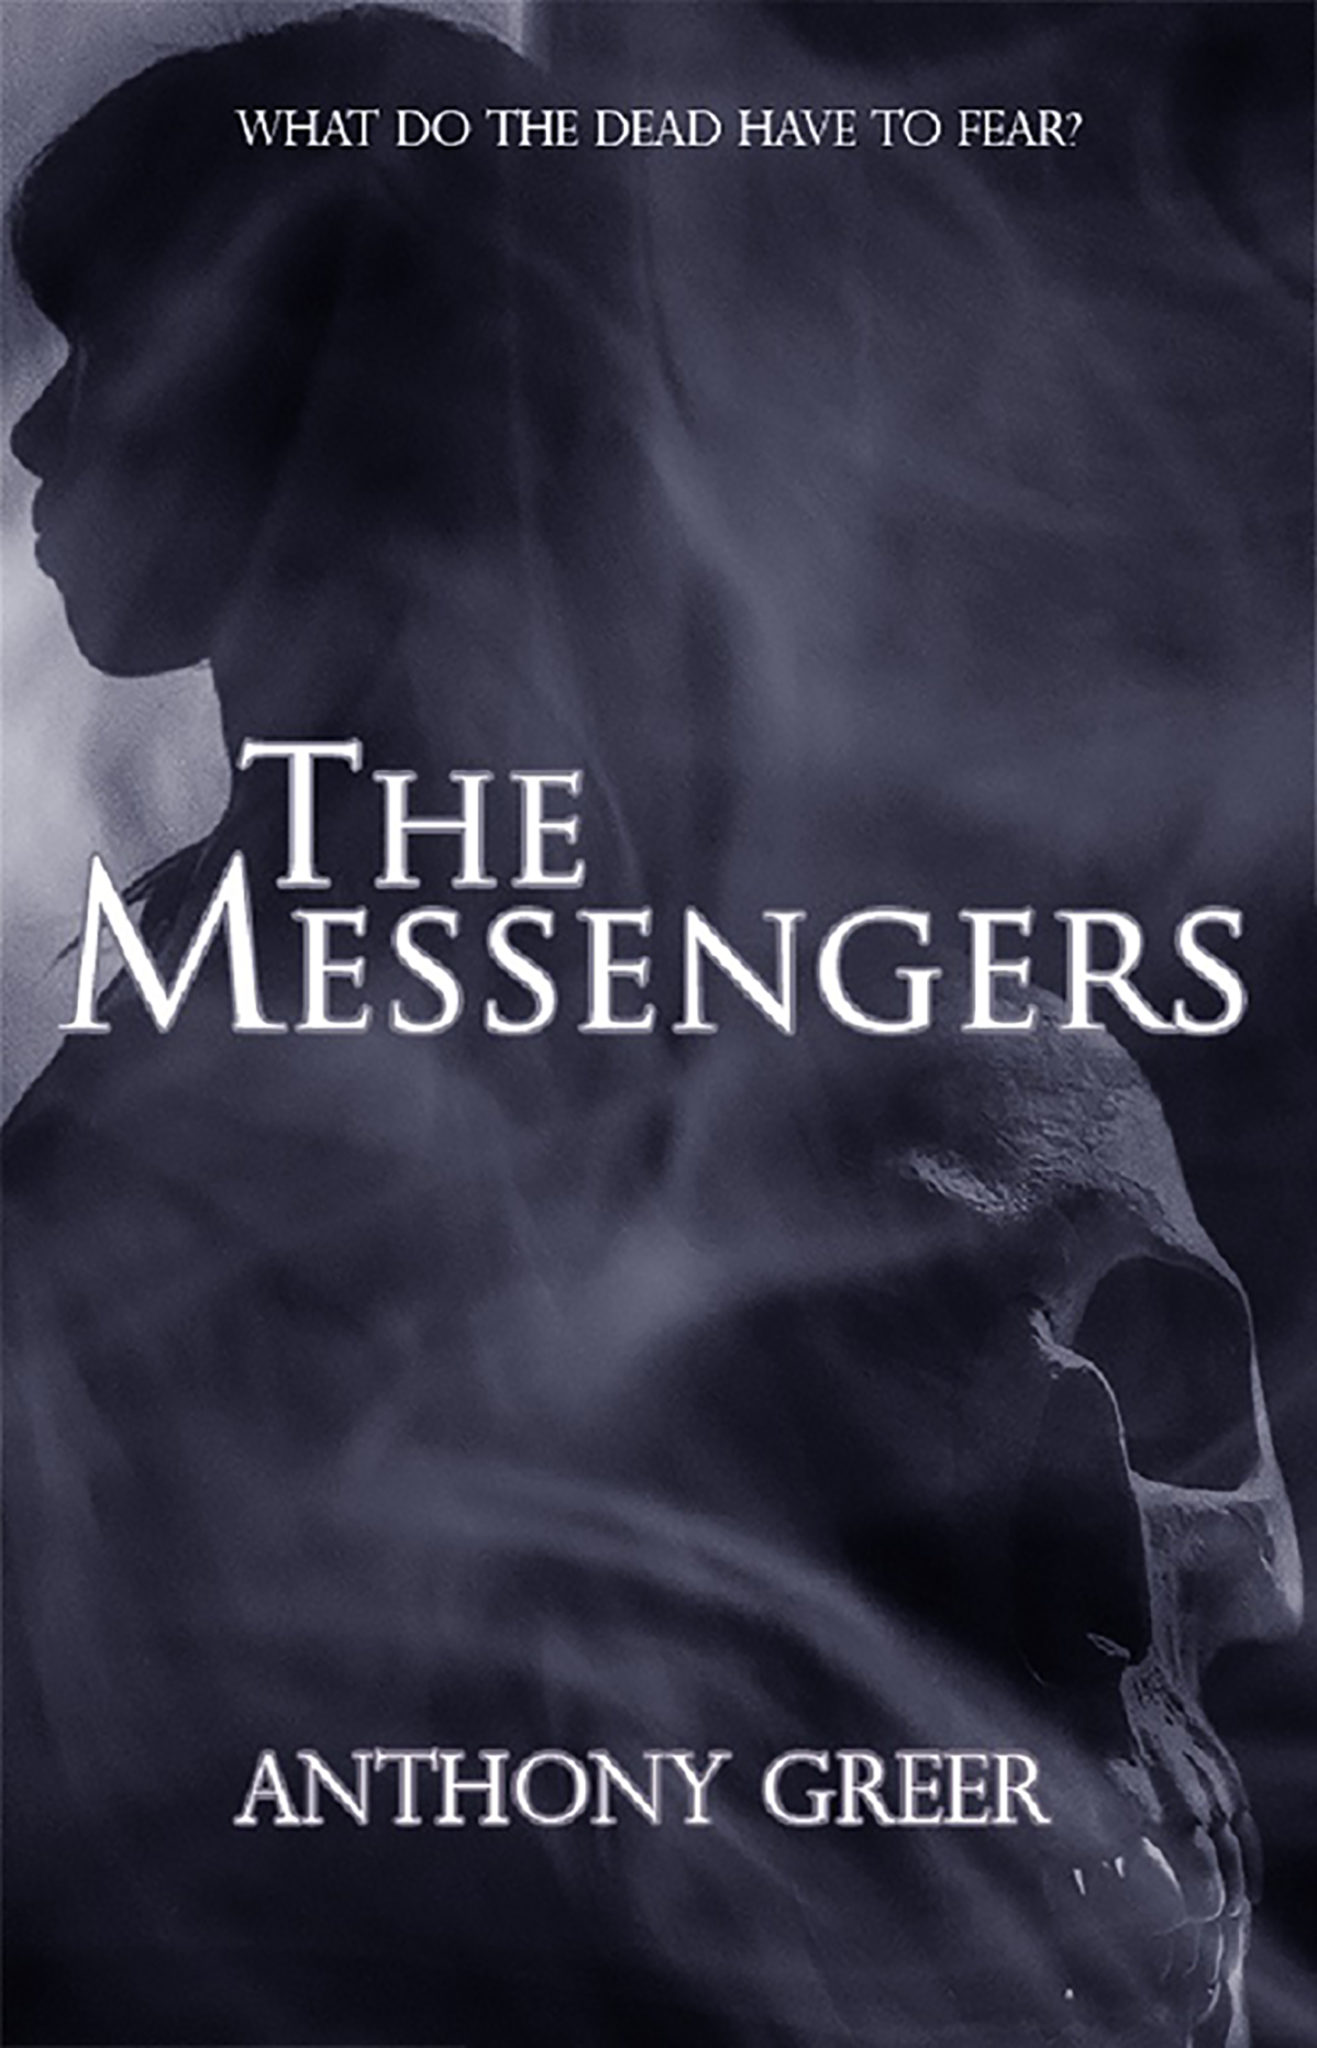 FREE: The Messengers by Anthony Greer